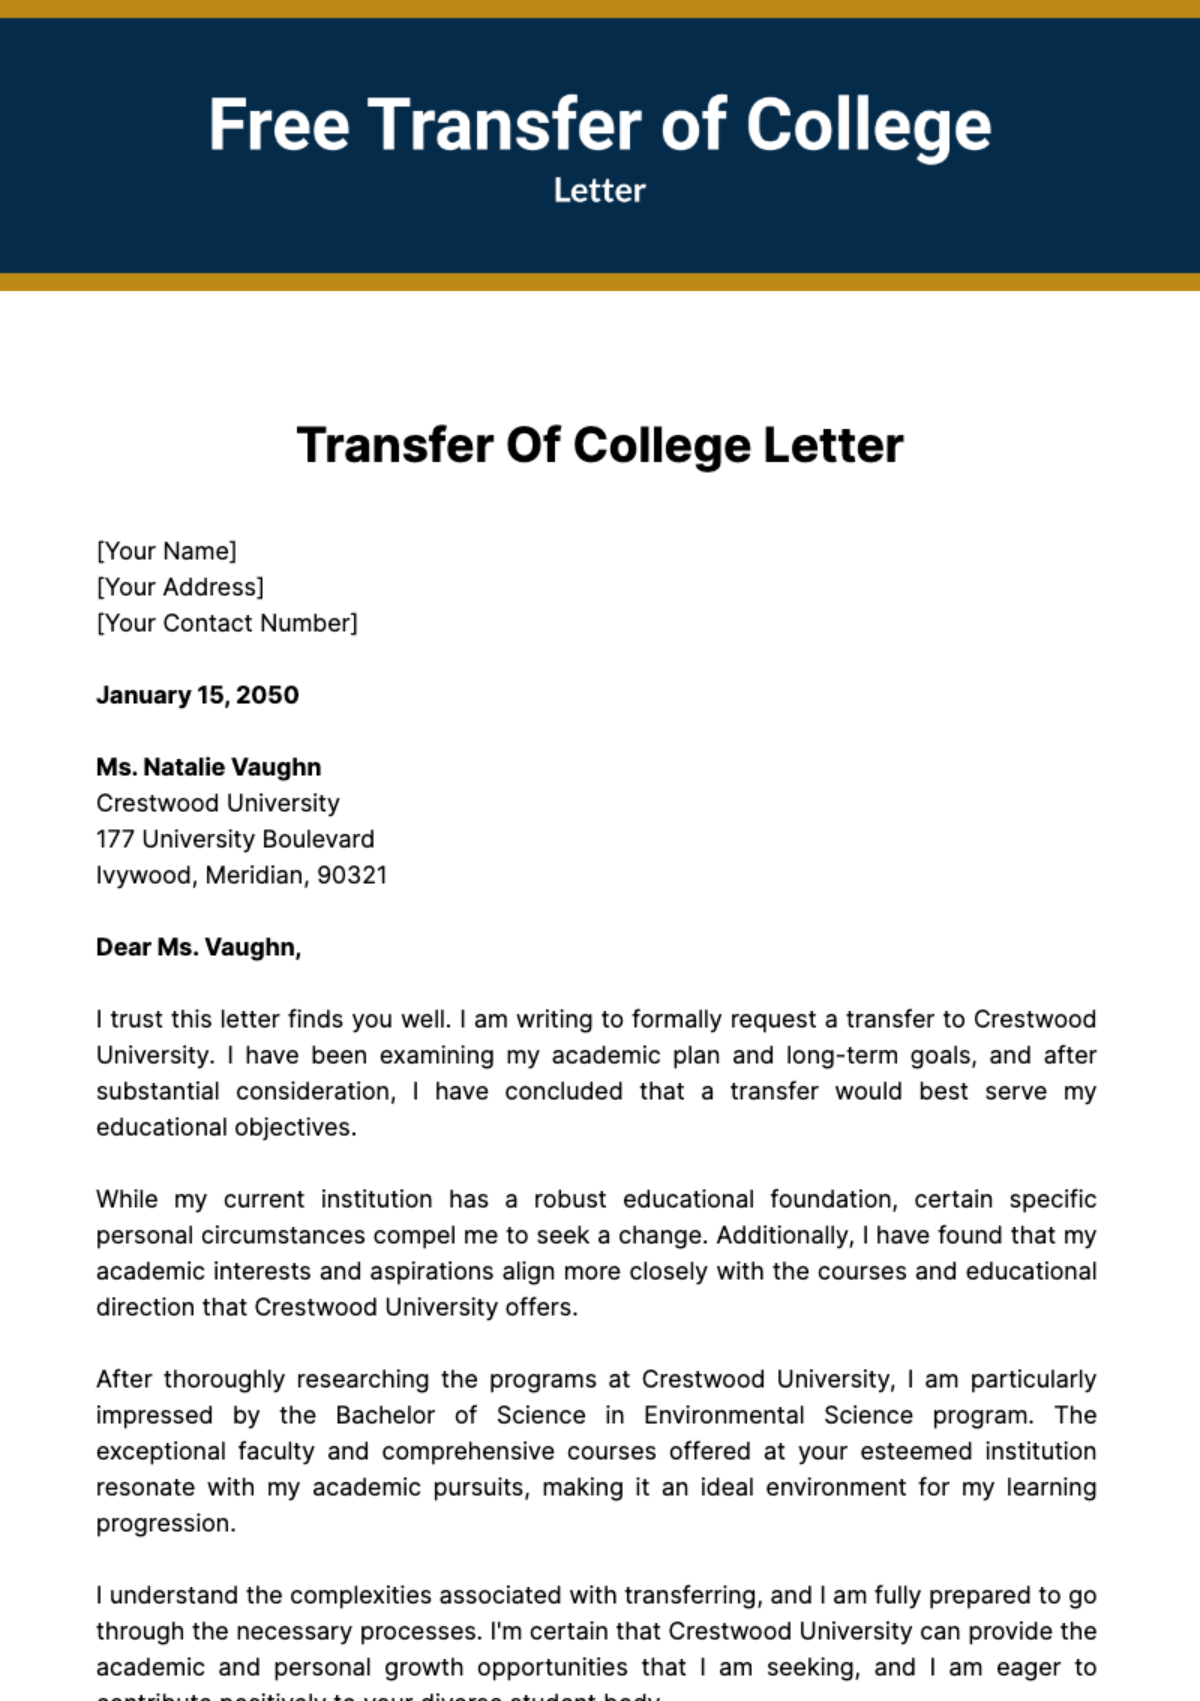 Free Transfer of College Letter Template